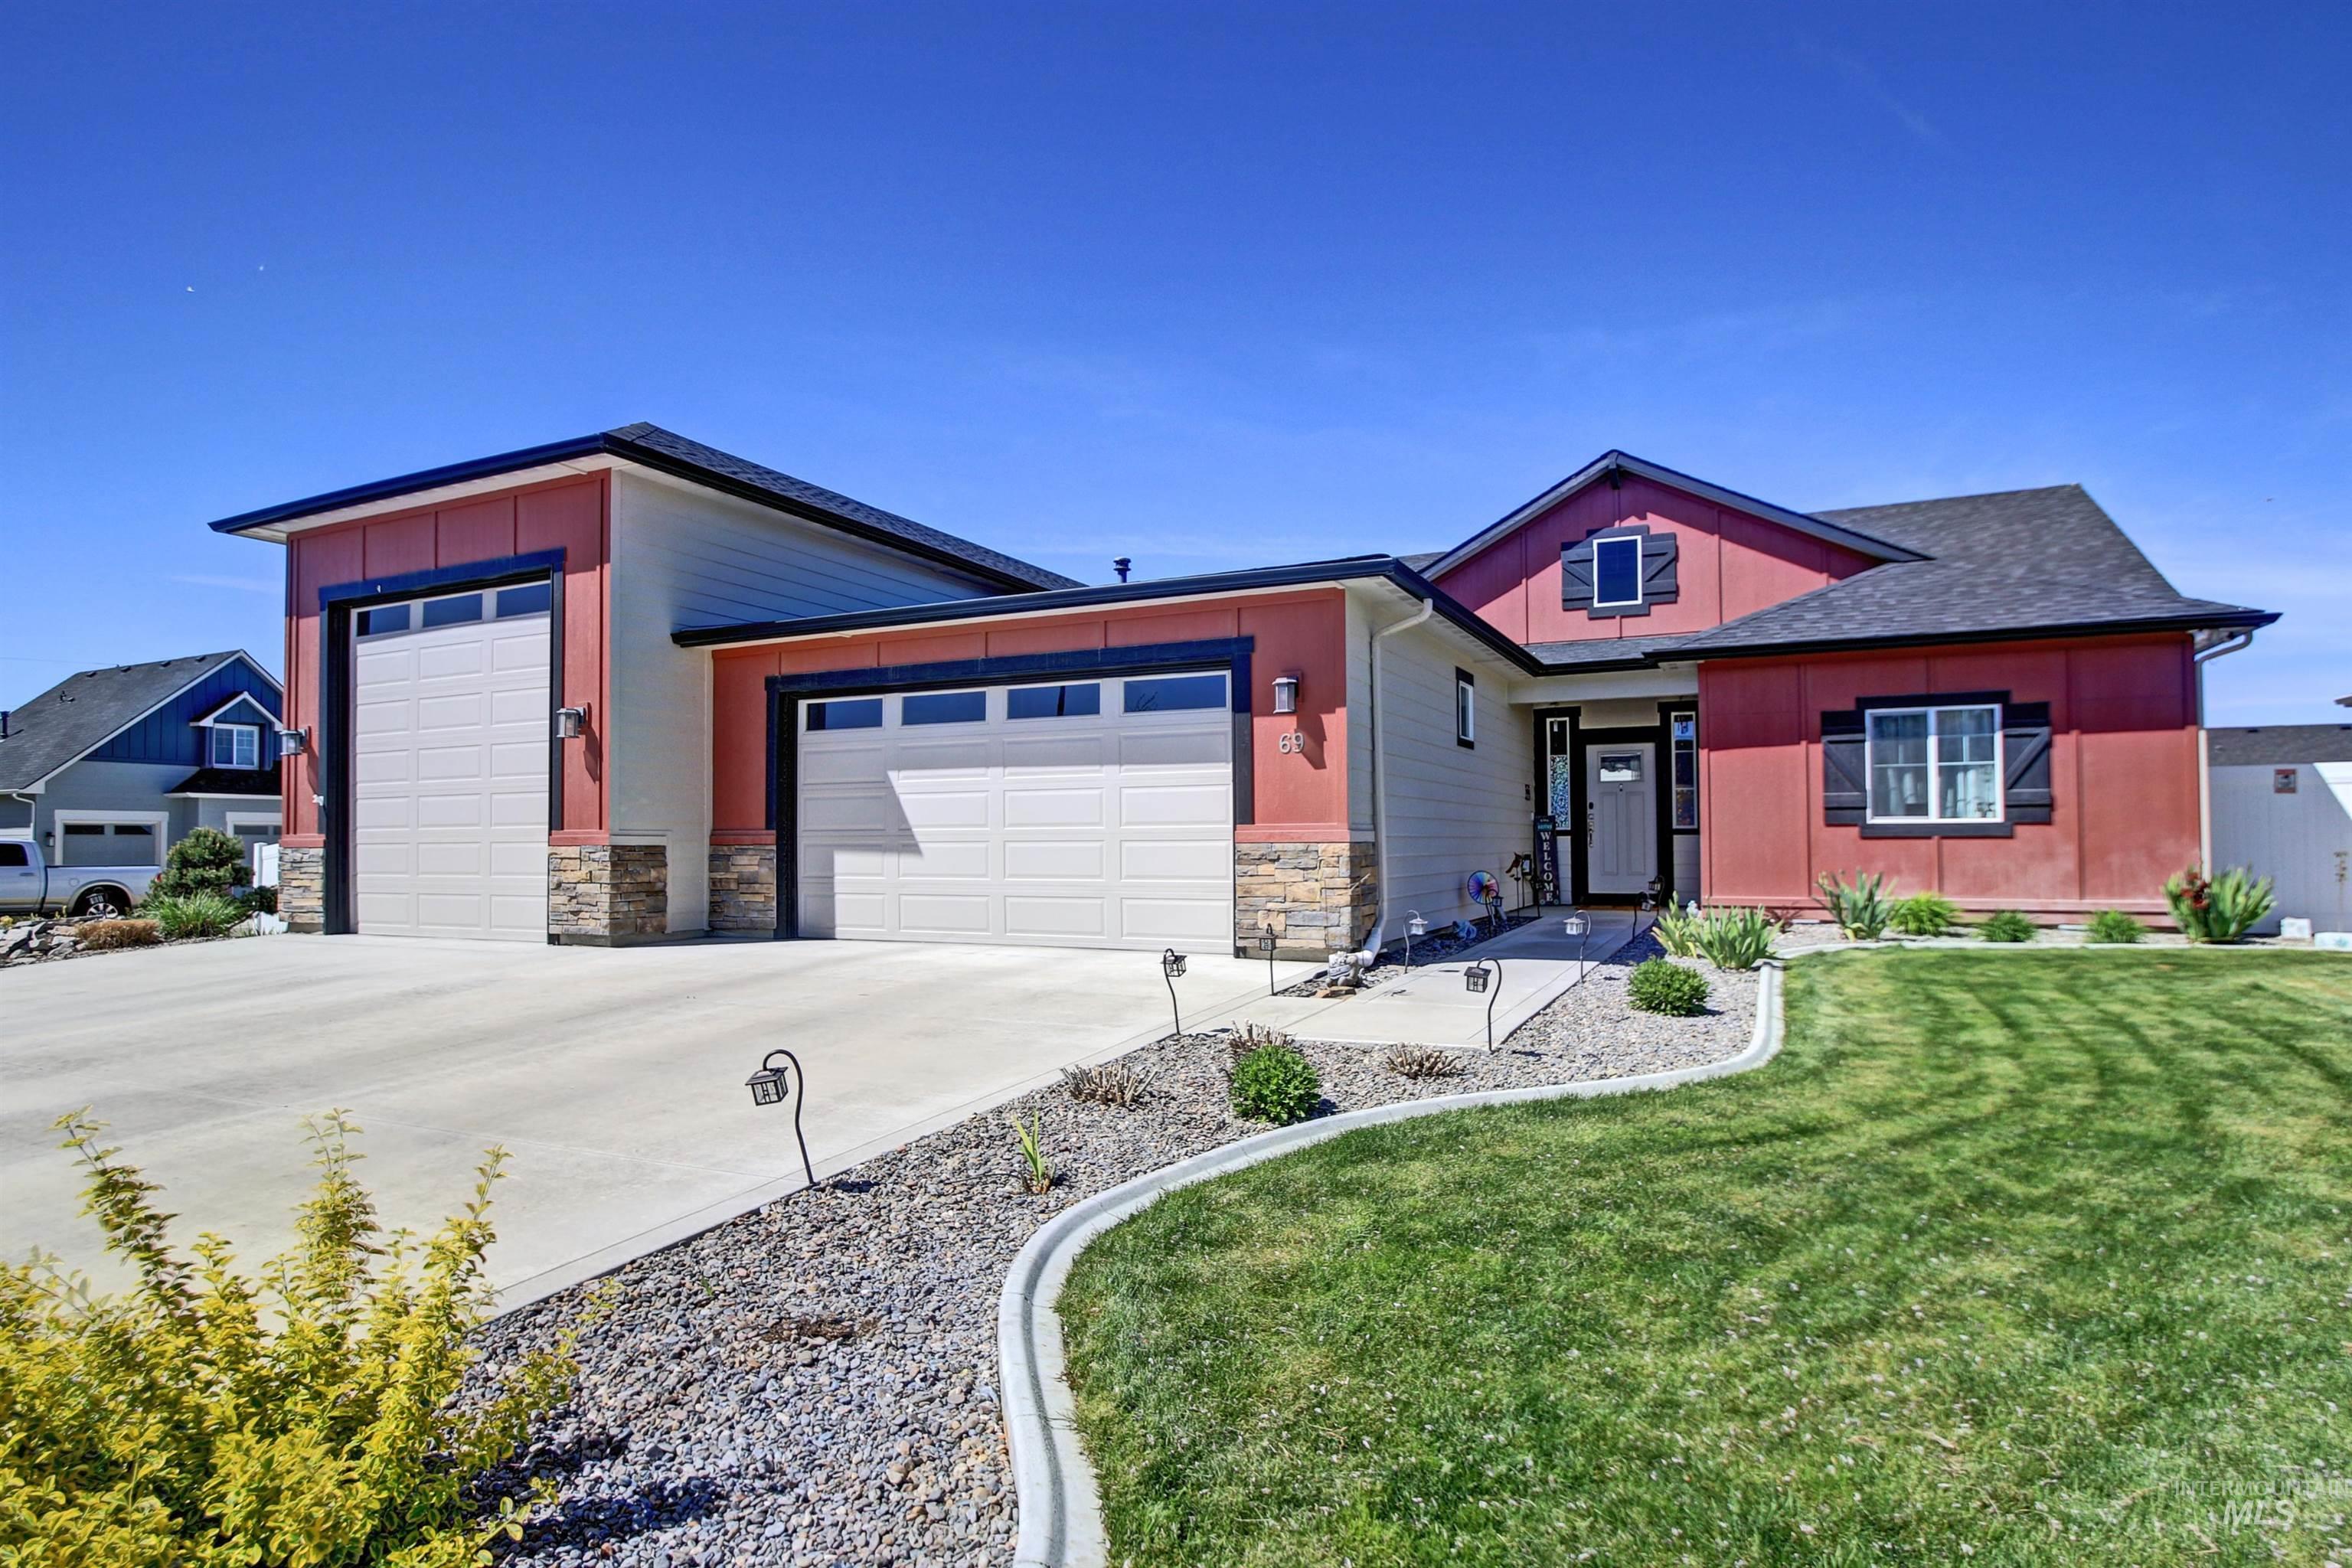 69 S Norcrest Ave., Nampa, Idaho 83687, 4 Bedrooms, 2.5 Bathrooms, Residential For Sale, Price $560,000,MLS 98908629